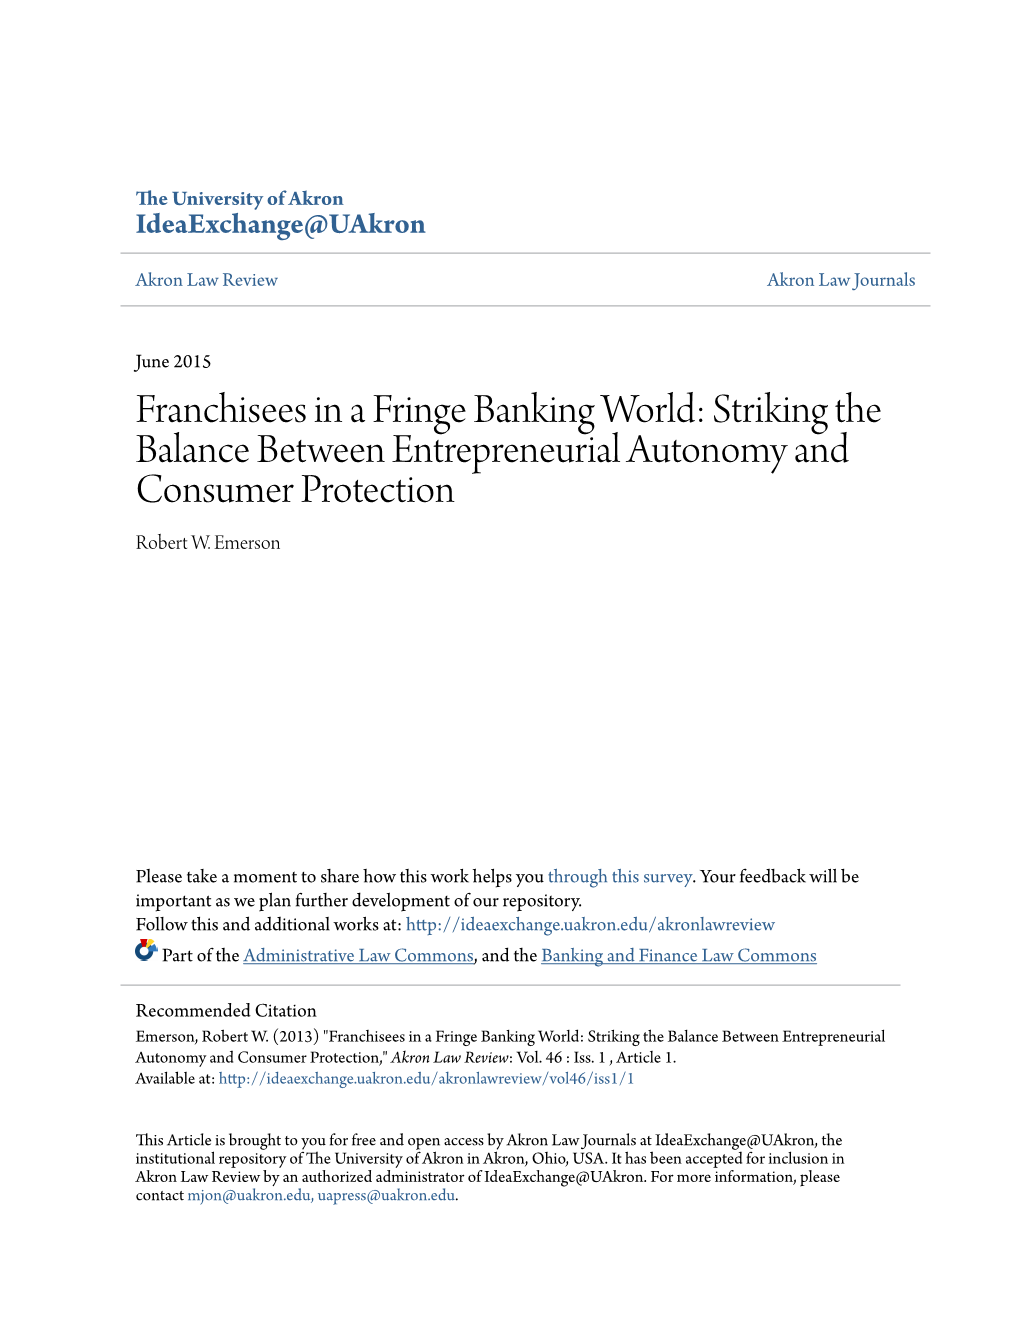 Franchisees in a Fringe Banking World: Striking the Balance Between Entrepreneurial Autonomy and Consumer Protection Robert W